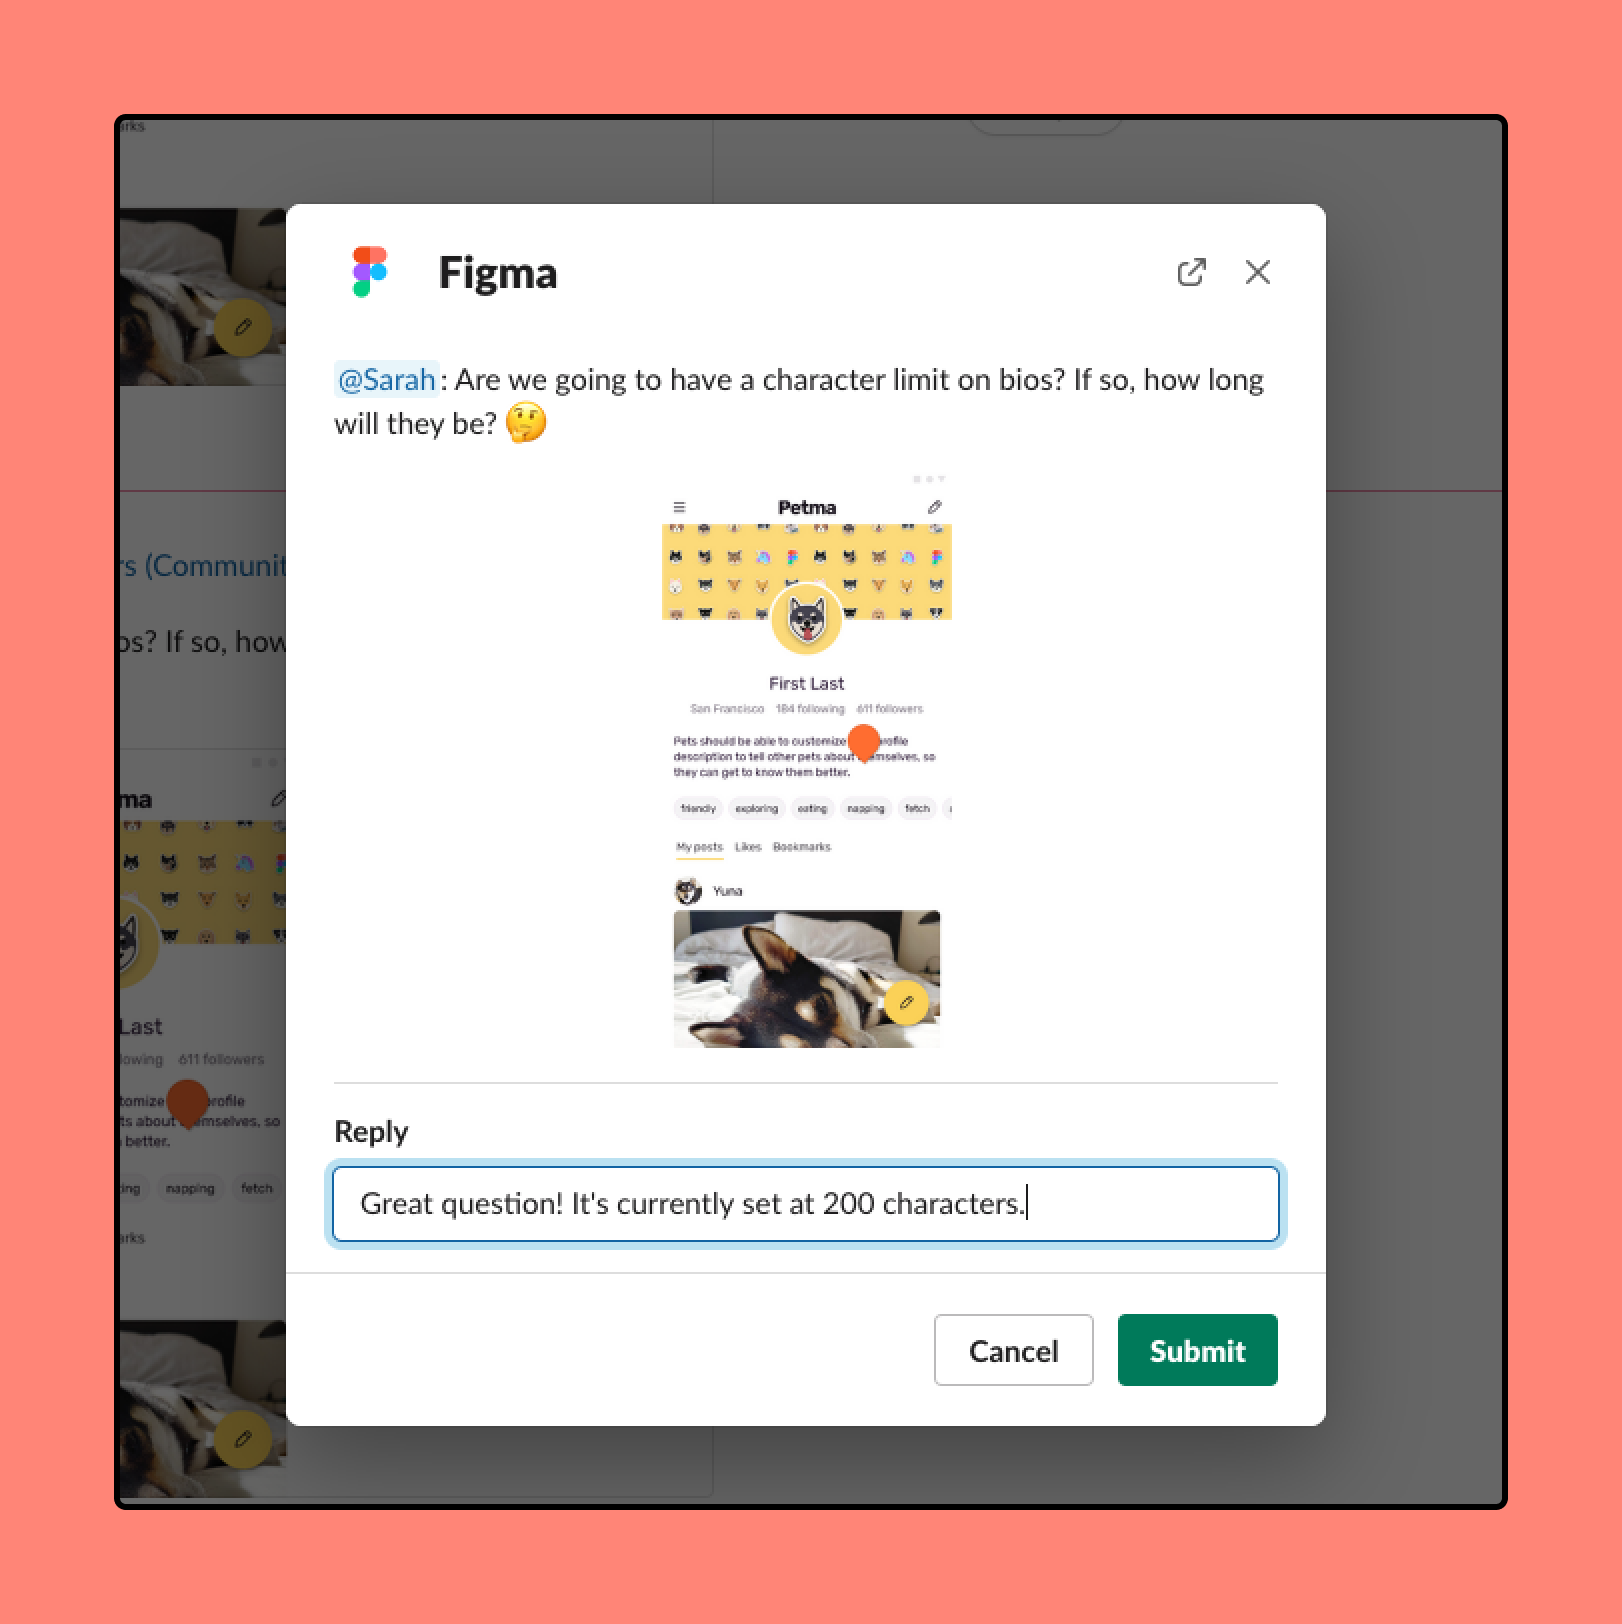 Reply modal for Figma comment in Slack